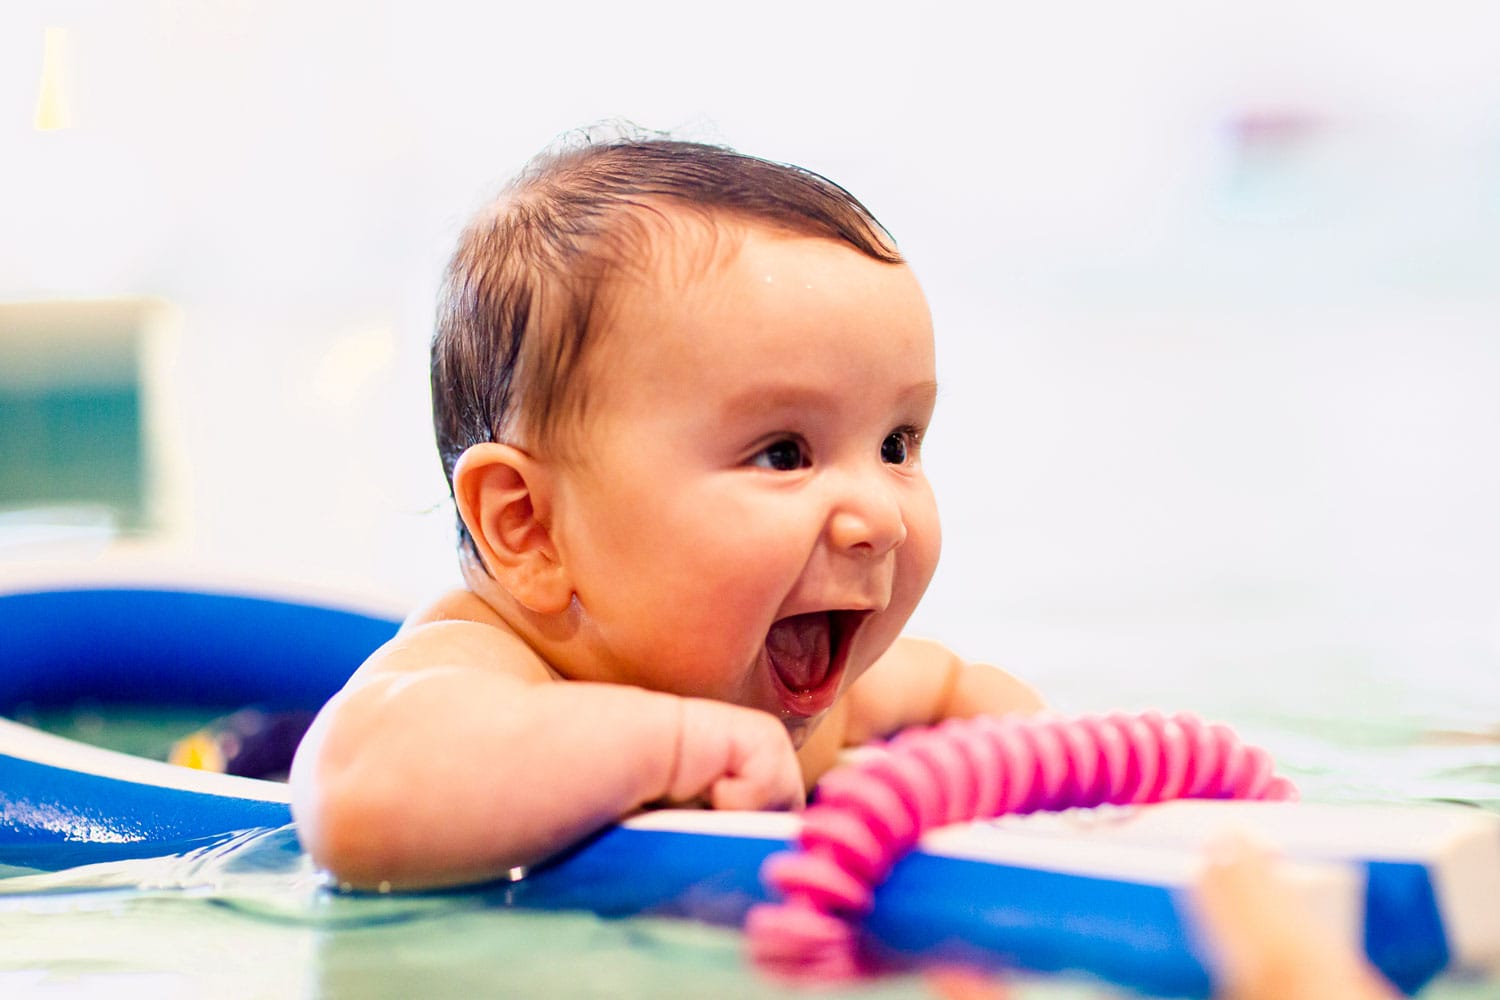 A Smiling baby in a floating ring learning to swim